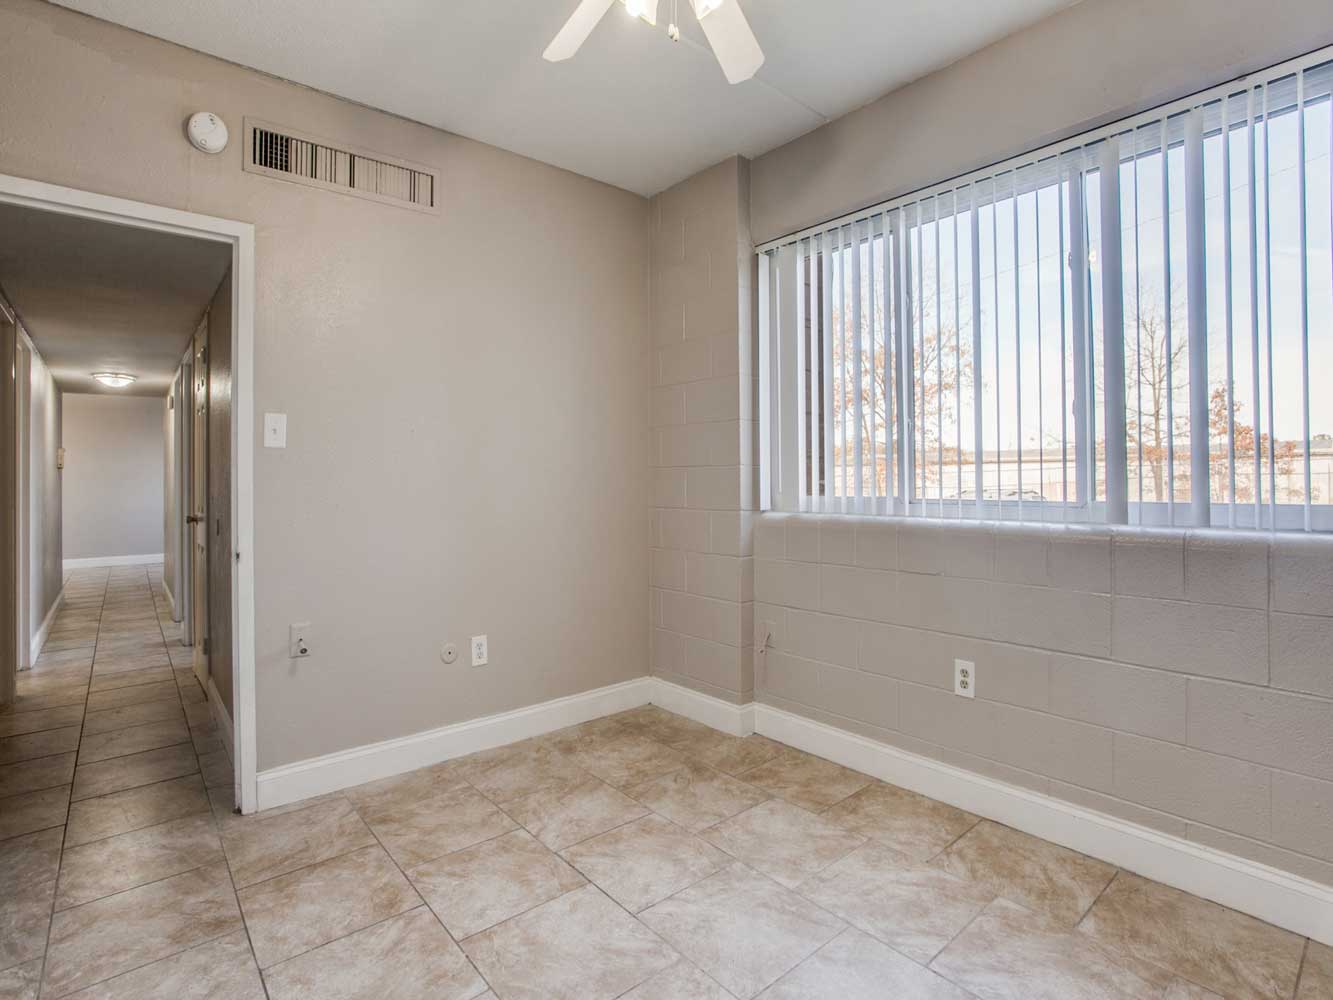 Bedrooms with Ceiling Fans at Villas on Sixty Fifth Apartments in Little Rock, Arkansas